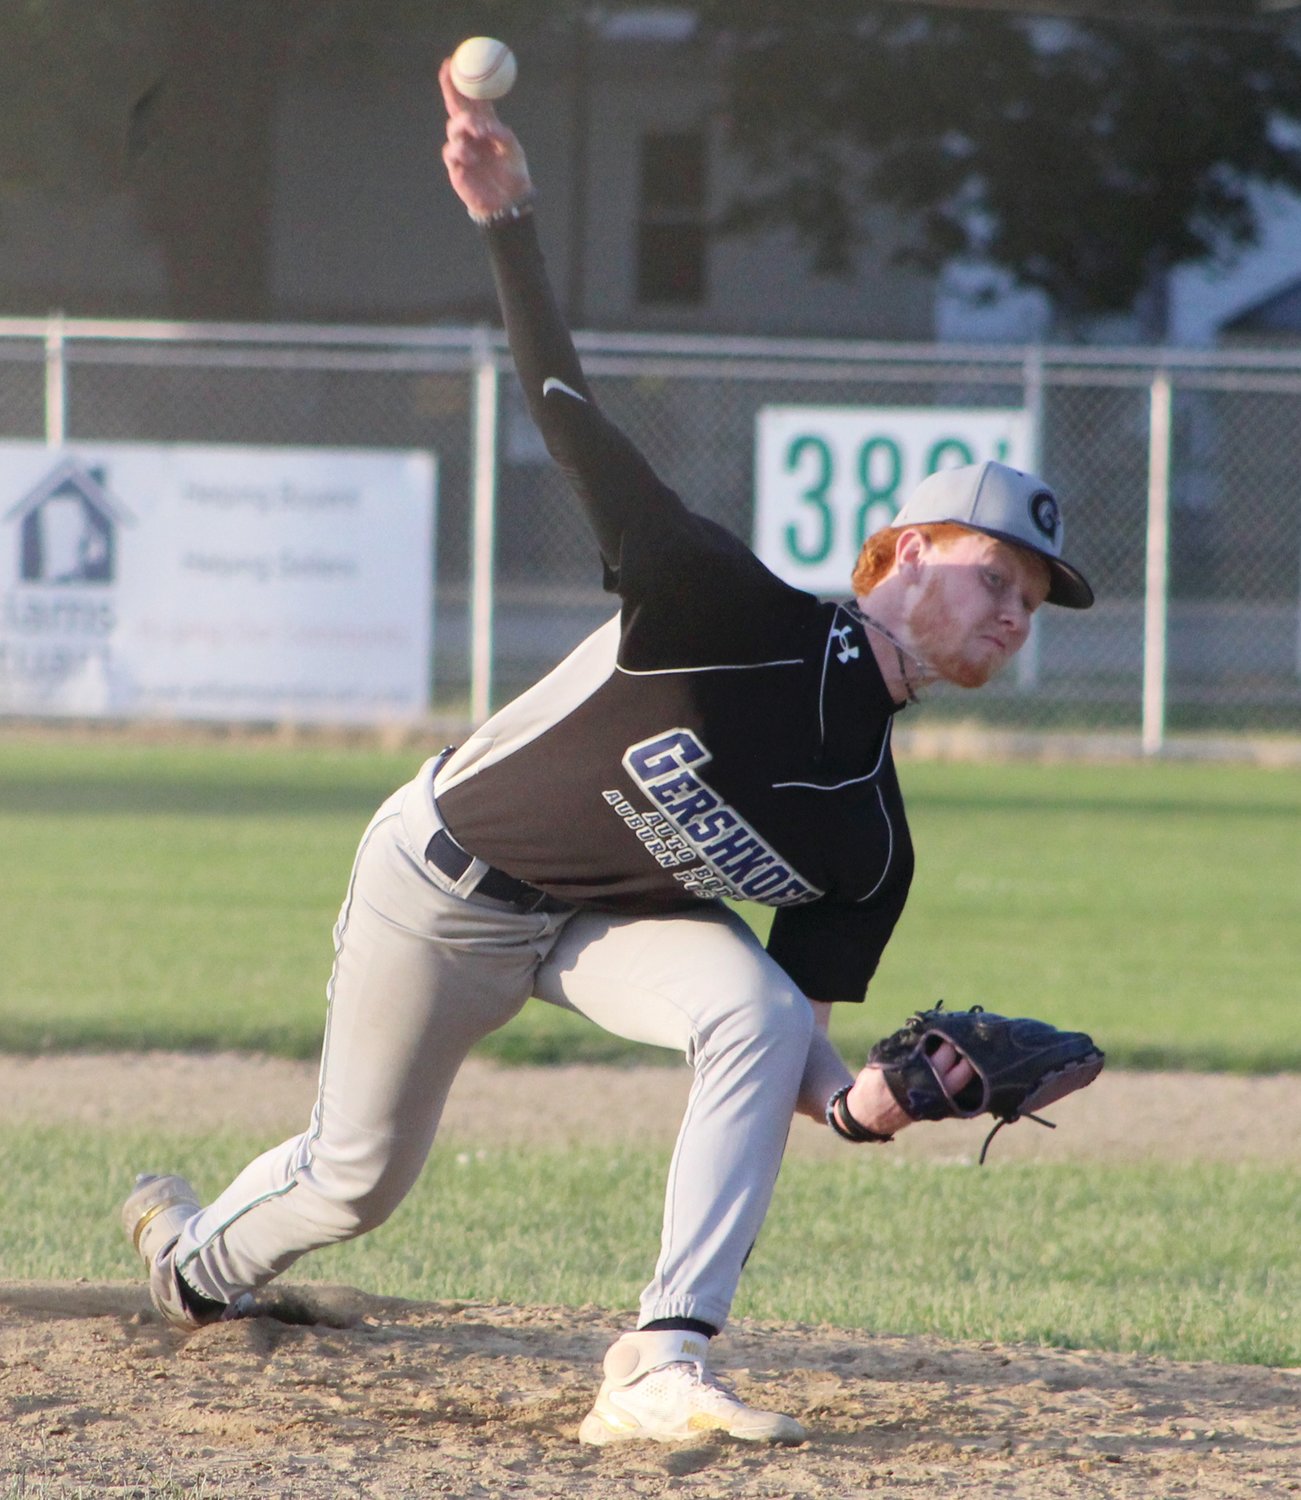 FROM THE MOUND: Matt Winn throws a pitch during a double-header Monday night. Winn’s the starting pitcher for Cranston/Johnston based Legion team Gershkoff Auburn Post 20. (Herald photo by Ryan D. Murray)